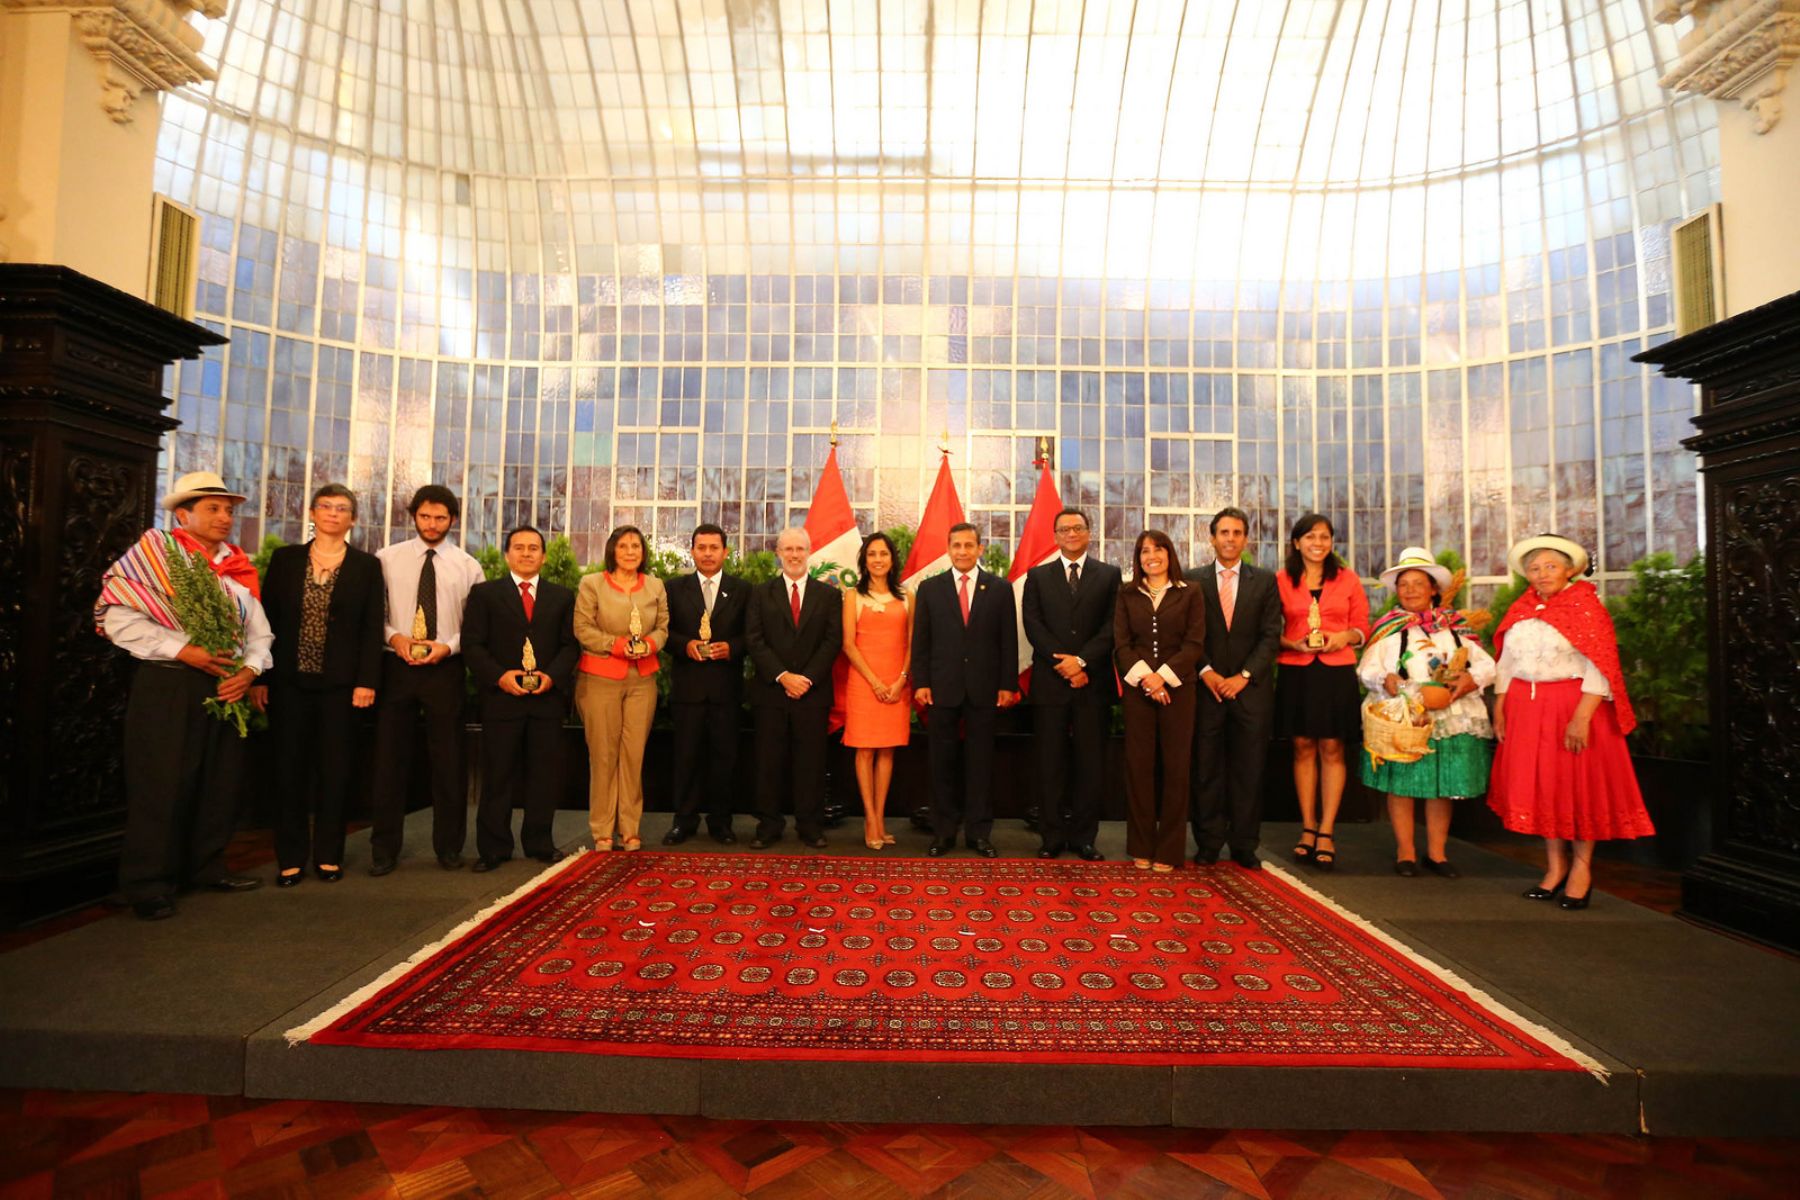 The award-giving ceremony of the International Contest on Quinoa Technological Innovation held at Lima’s Government Palace on Apr. 22.